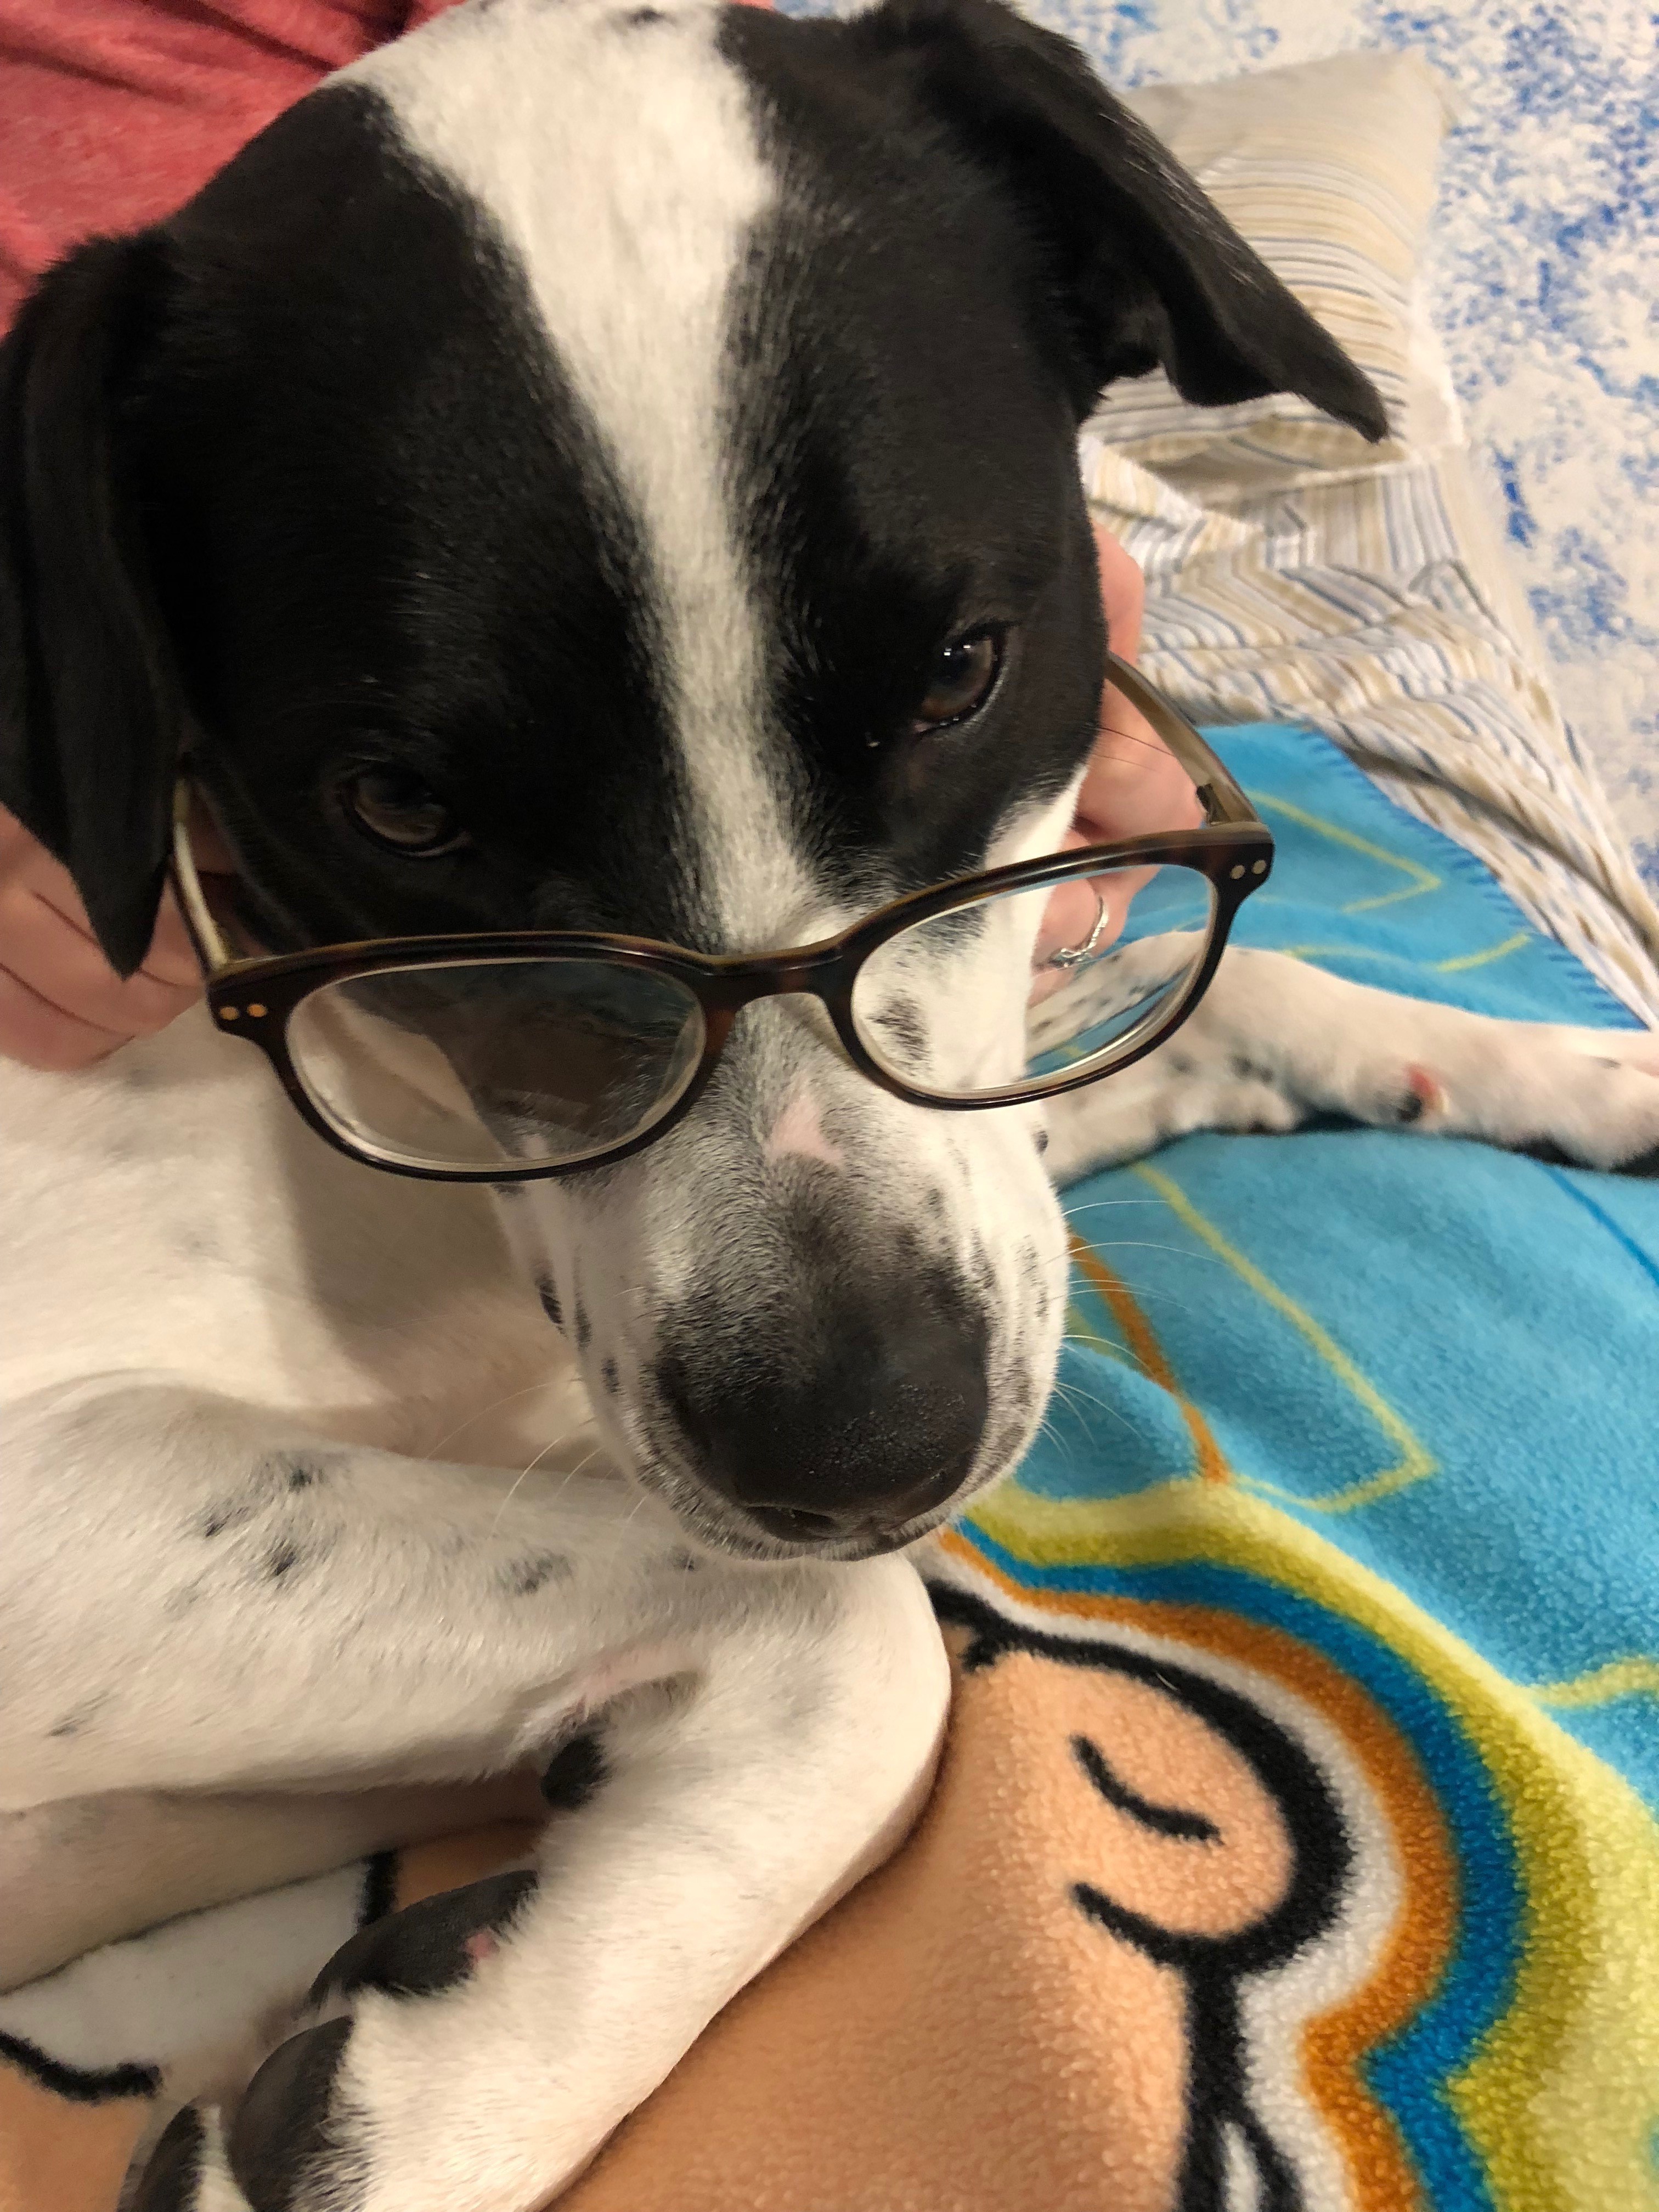 Milo looking very studious with his glasses!